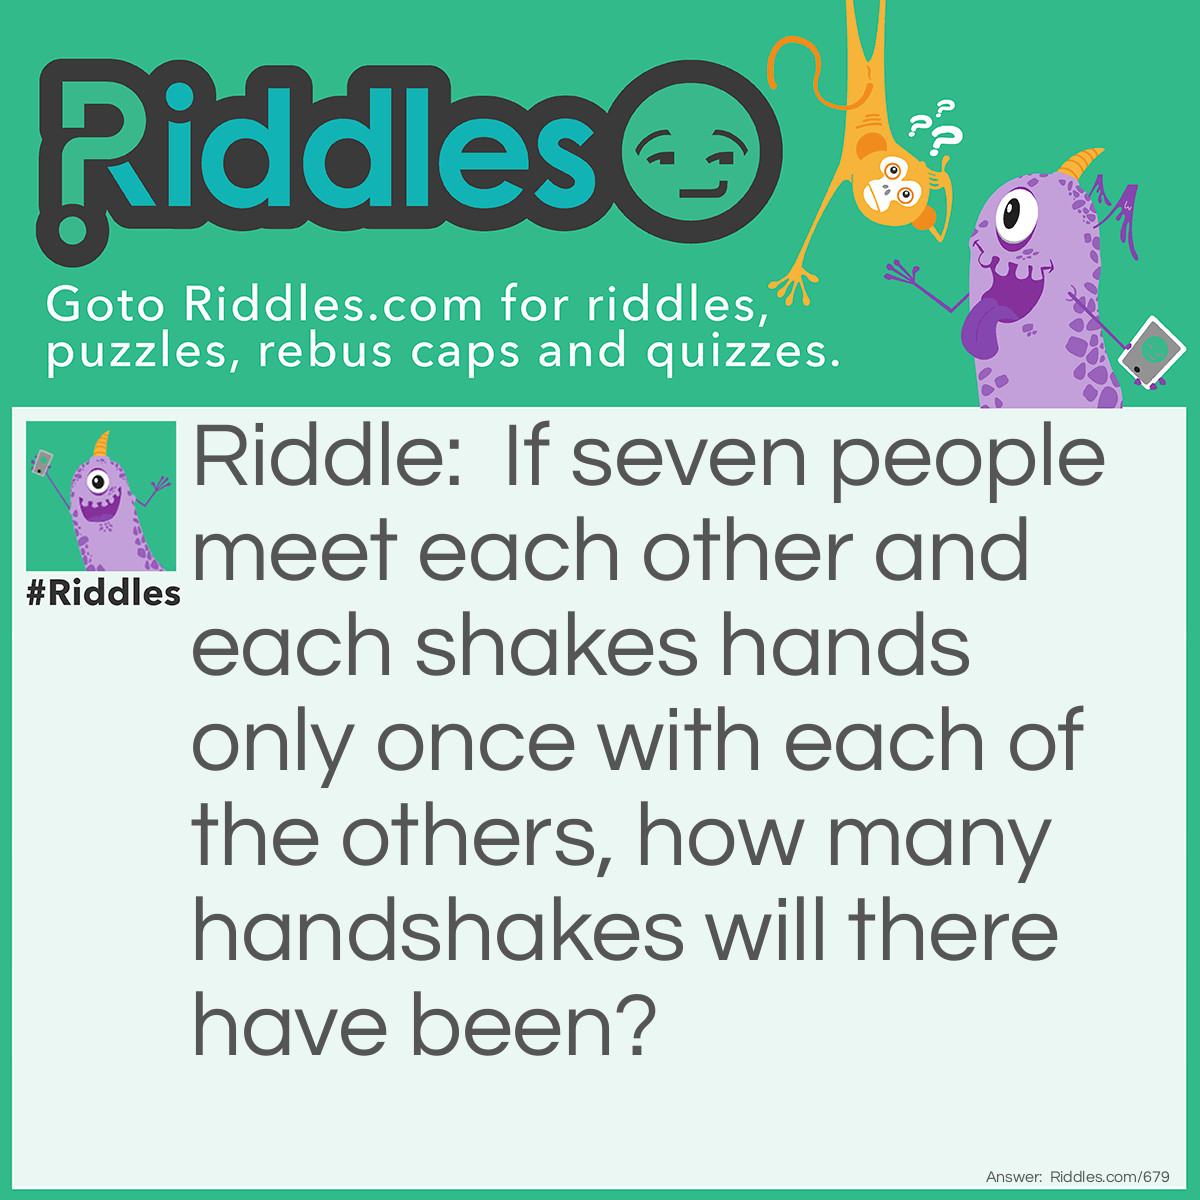 Riddle: If seven people meet each other and each shakes hands only once with each of the others, how many handshakes will there have been?
  Answer: Twenty one. Most people would think there were 42 handshakes. The first person shakes the hand of <strong>6</strong> others, the second person shakes the hand of <strong>5</strong> remaining people, the third person shakes the hand of <strong>4</strong> remaining people, the fourth person shakes the hand of <strong>3</strong> remaining people, the 5th person shakes the hand of <strong>2</strong> remaining people and the sixth person shakes the hand of <strong>1</strong> remaining person. <strong>6</strong>+<strong>5</strong>+<strong>4</strong>+<strong>3</strong>+<strong>2</strong>+<strong>1</strong>=<strong>21</strong>